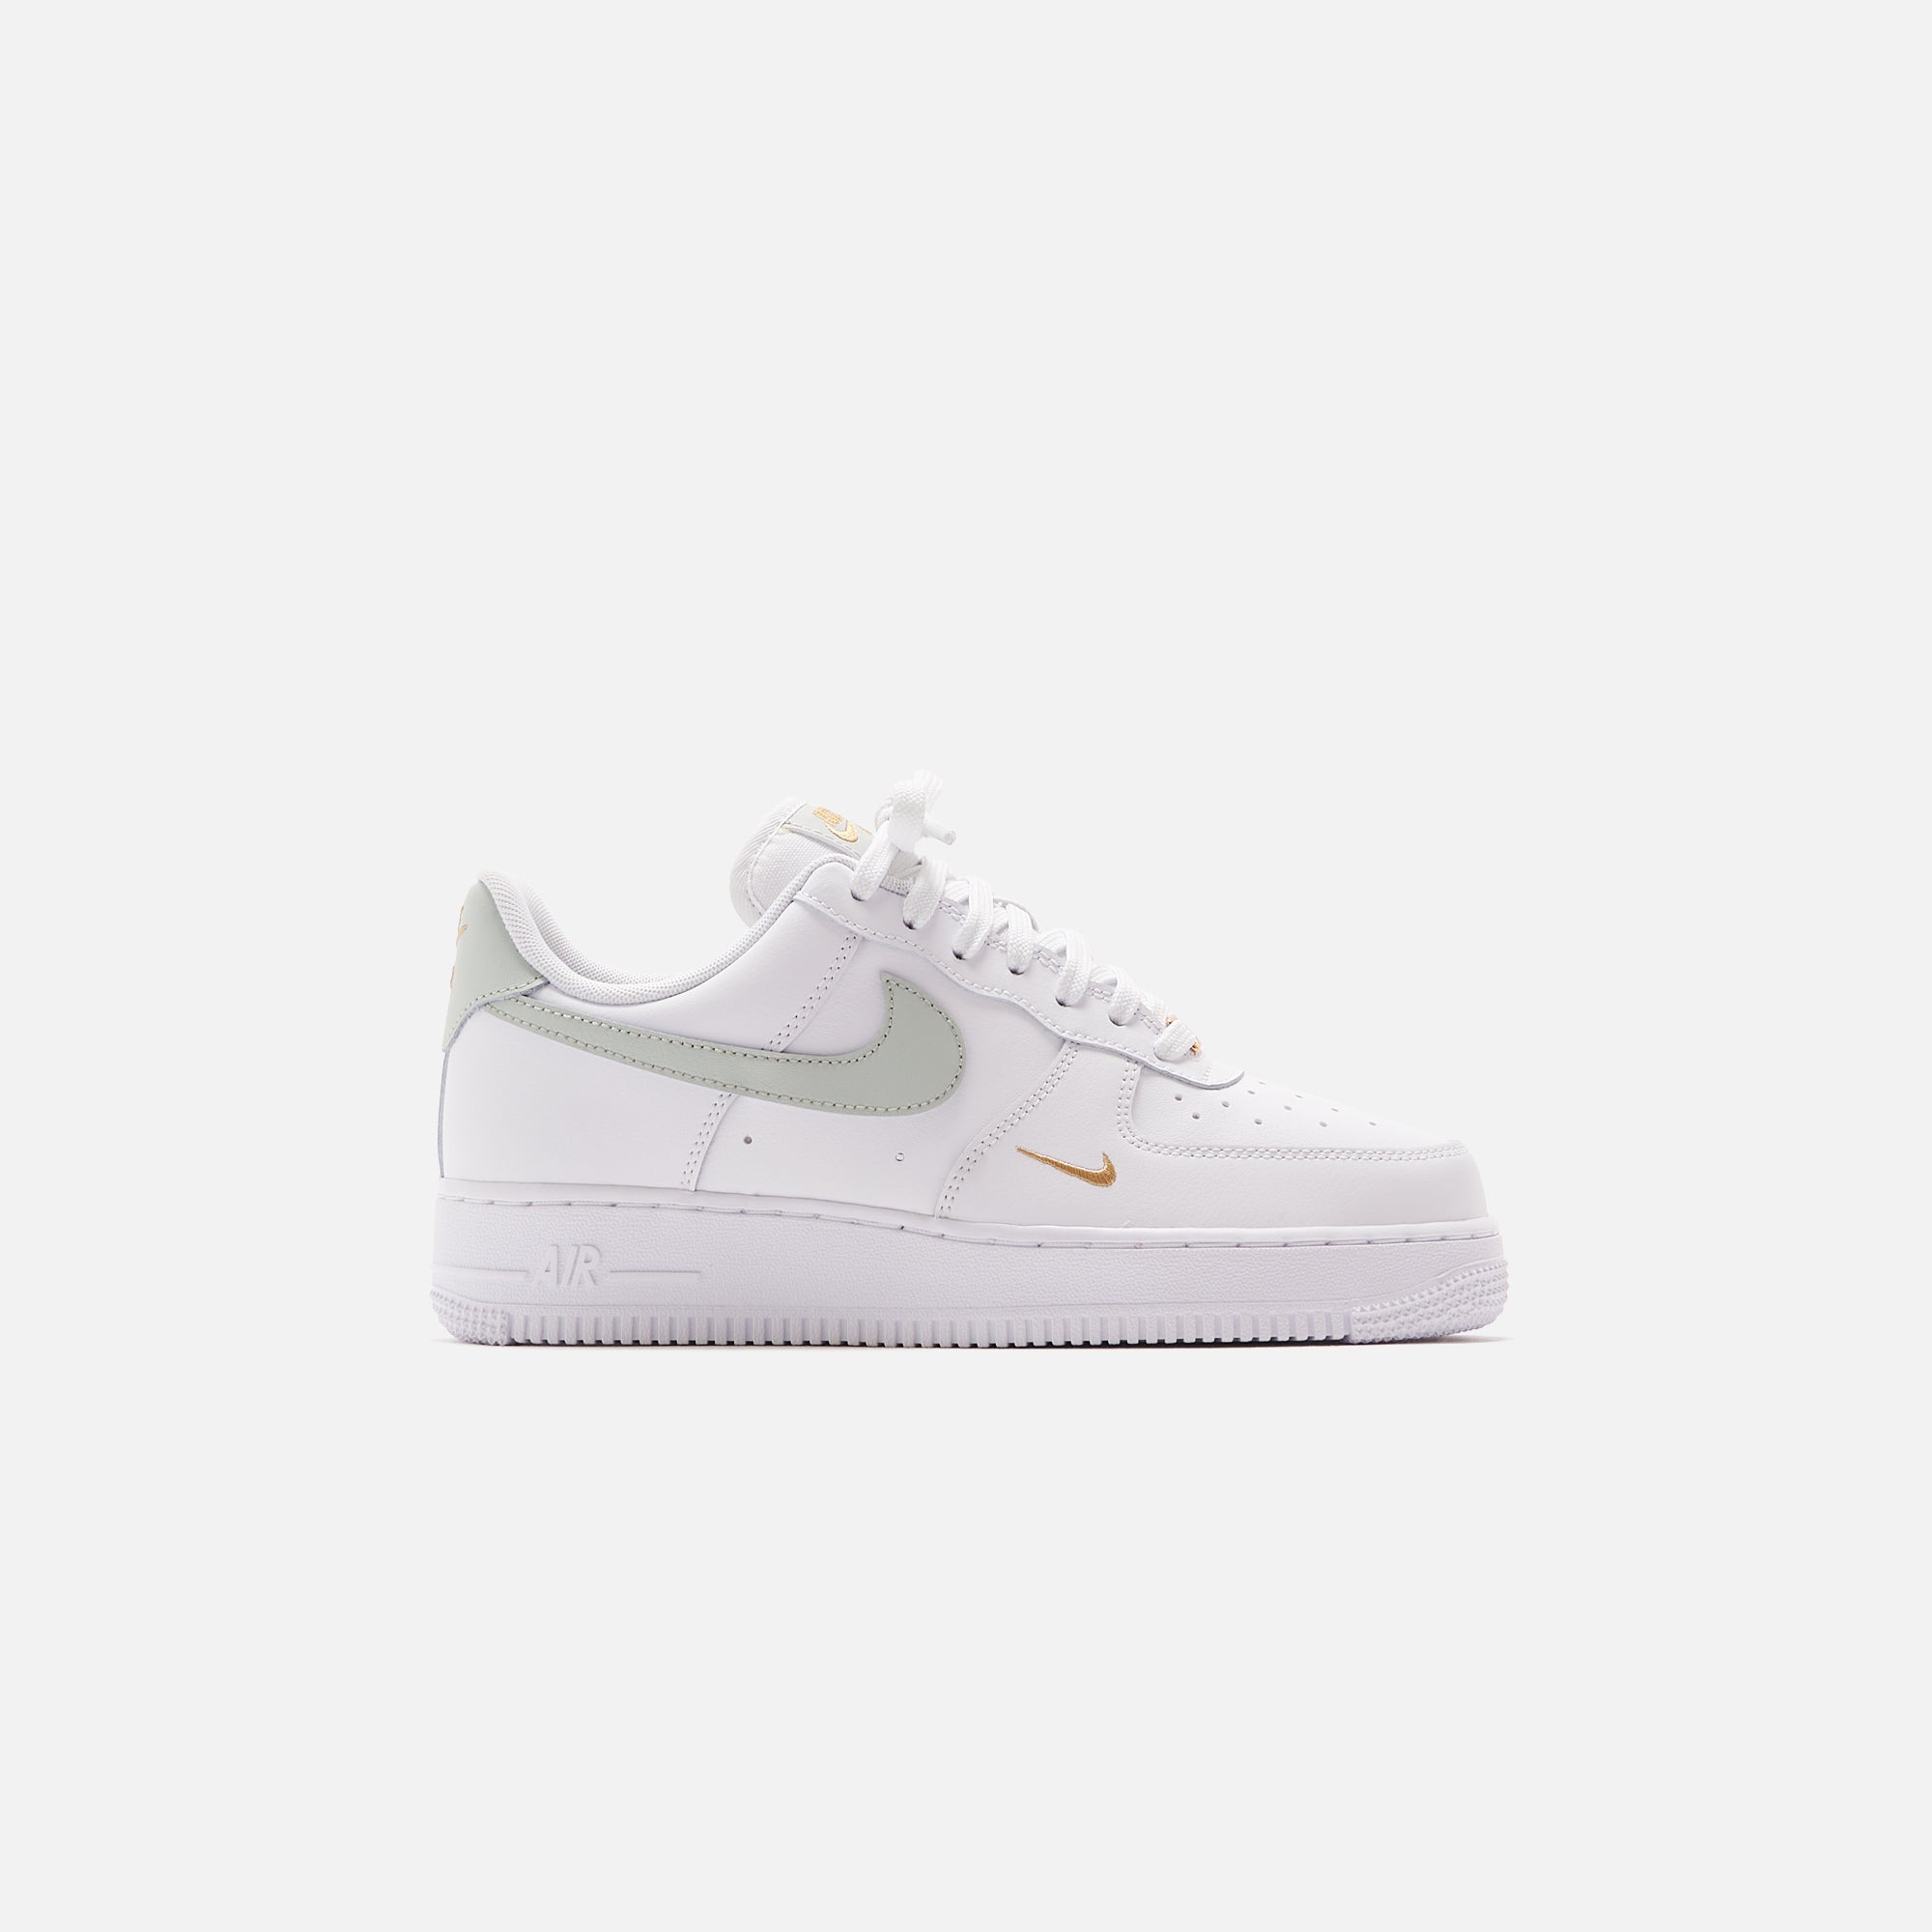 Nike WMNS Air Force 1 `07 Essential - White / Light Silver / White ...